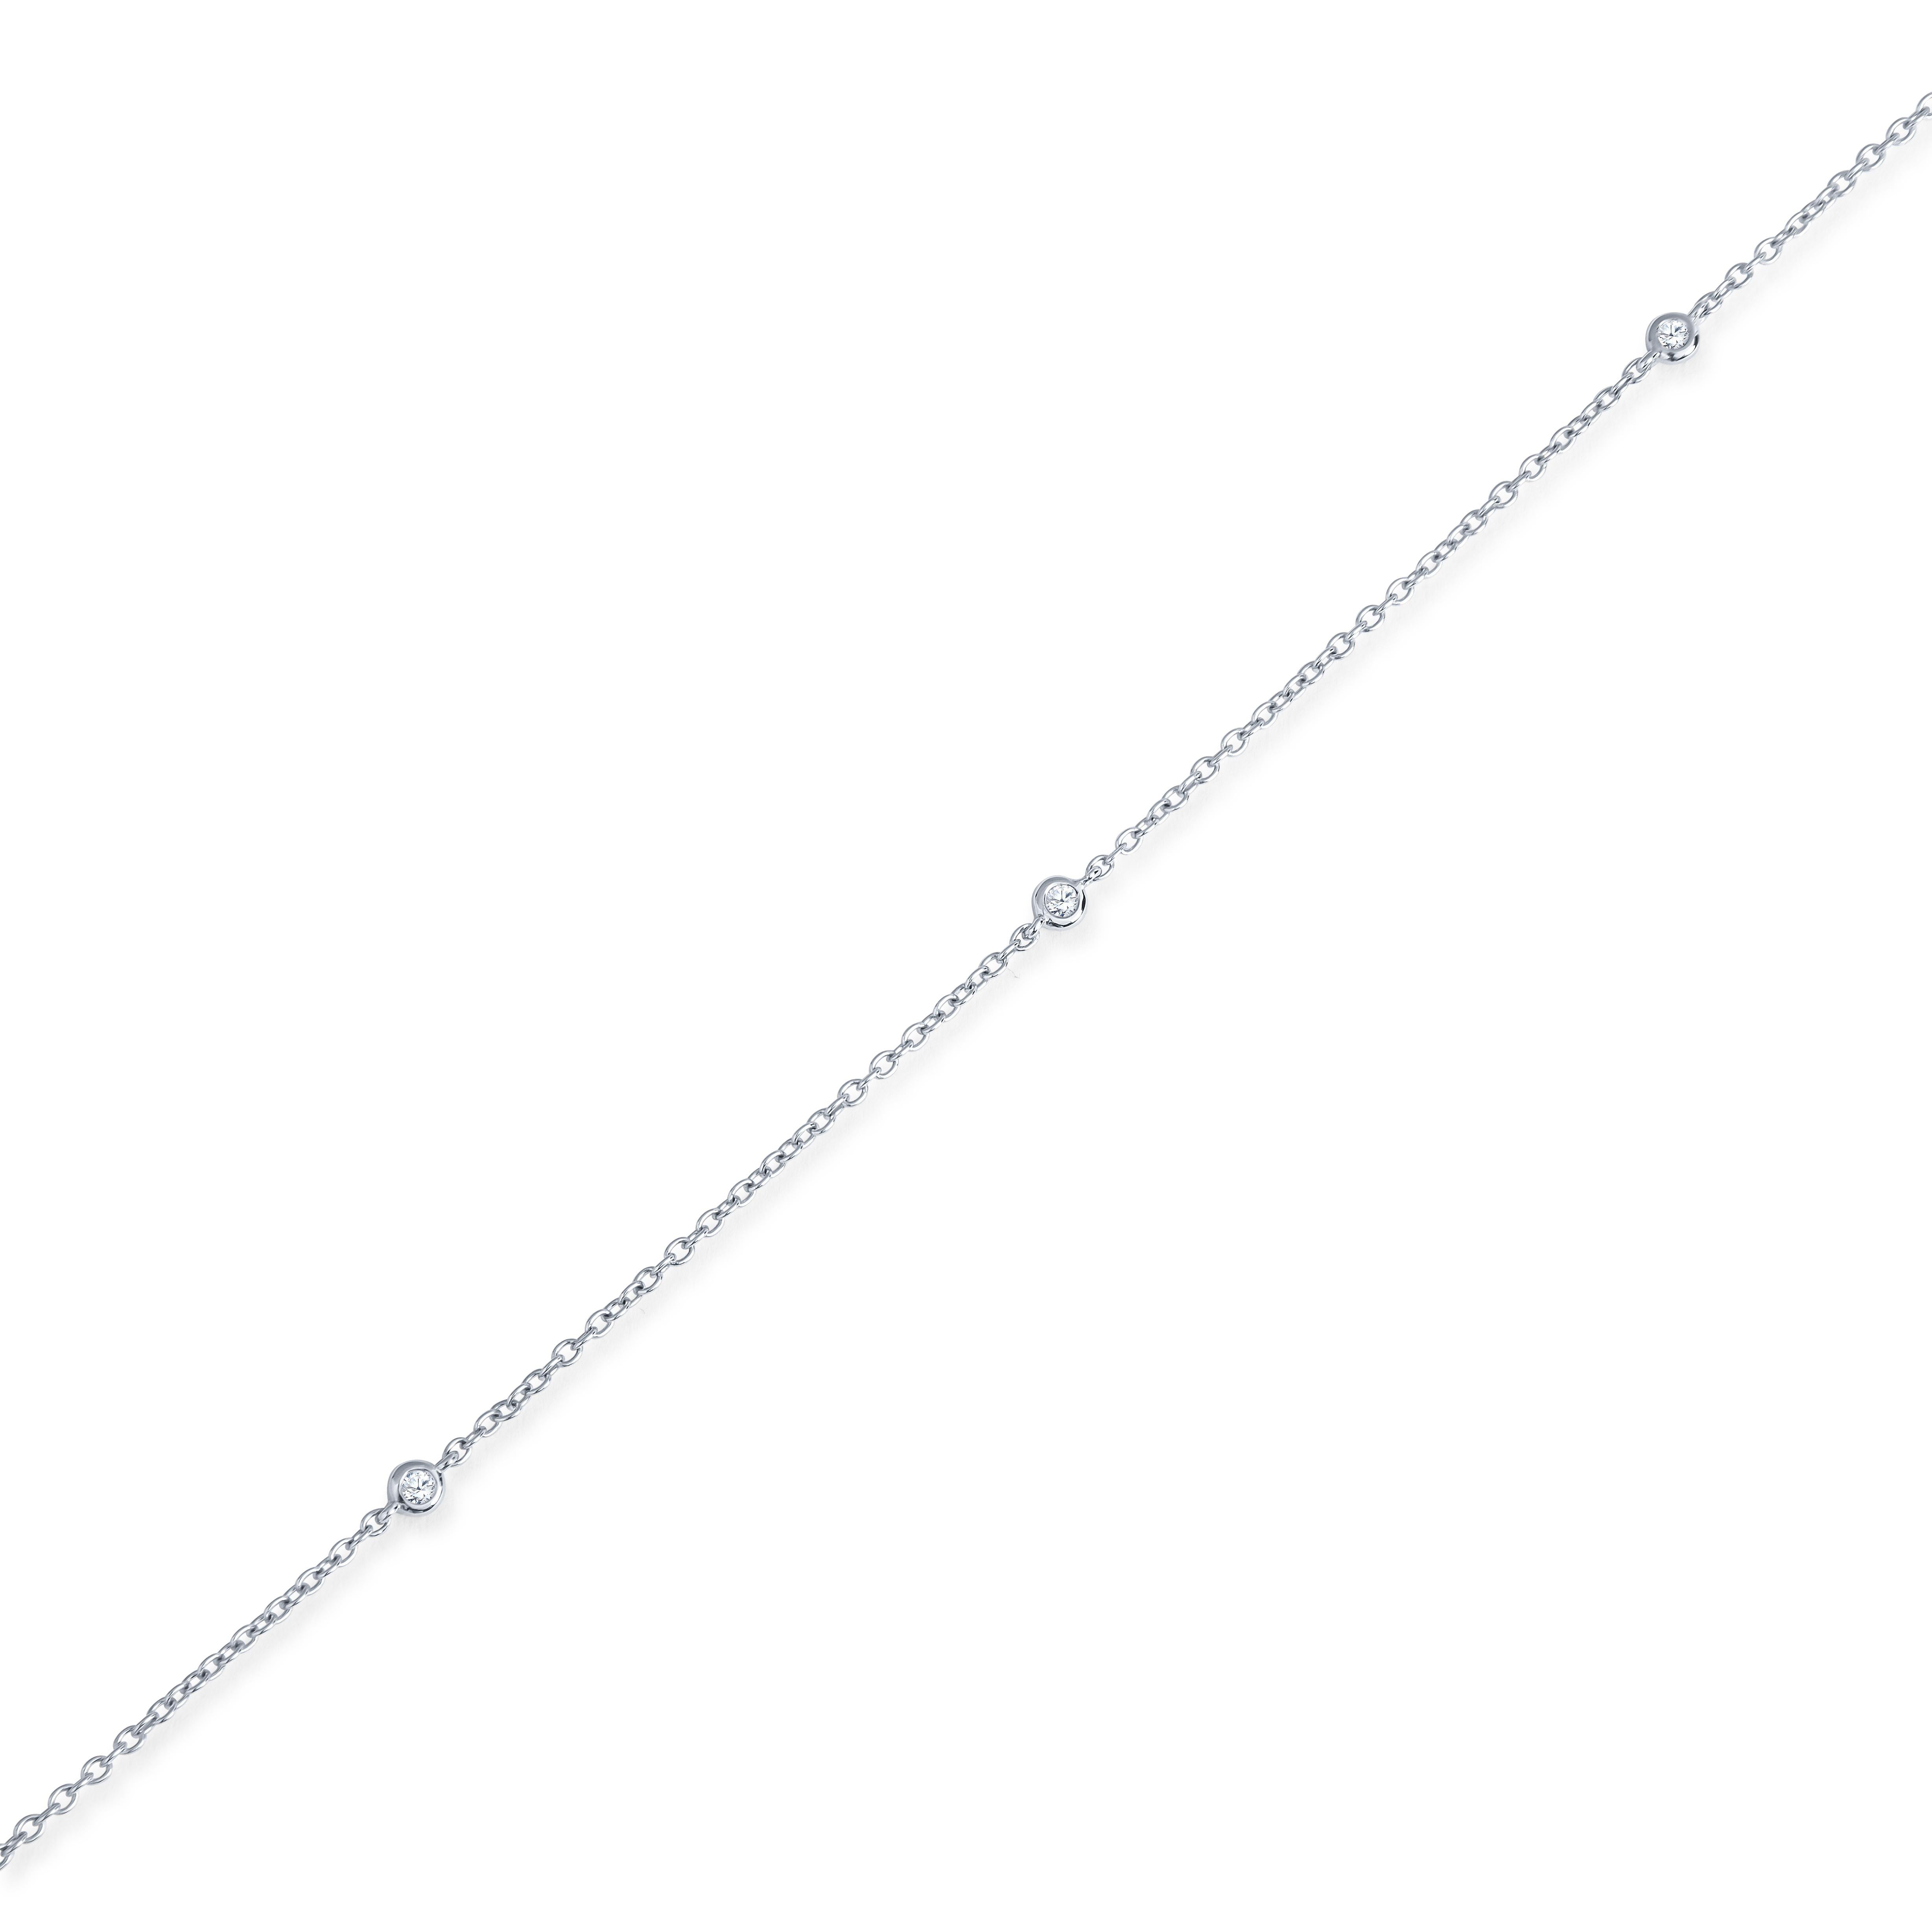 This station necklace is part of our Soft Glamour collection. It features 4 round brilliant, bezel set diamonds with a 0.07ct total weight. These diamonds are set in an 18kt white gold 17.5 inch cable chain. It is the ideal necklace to add elegance